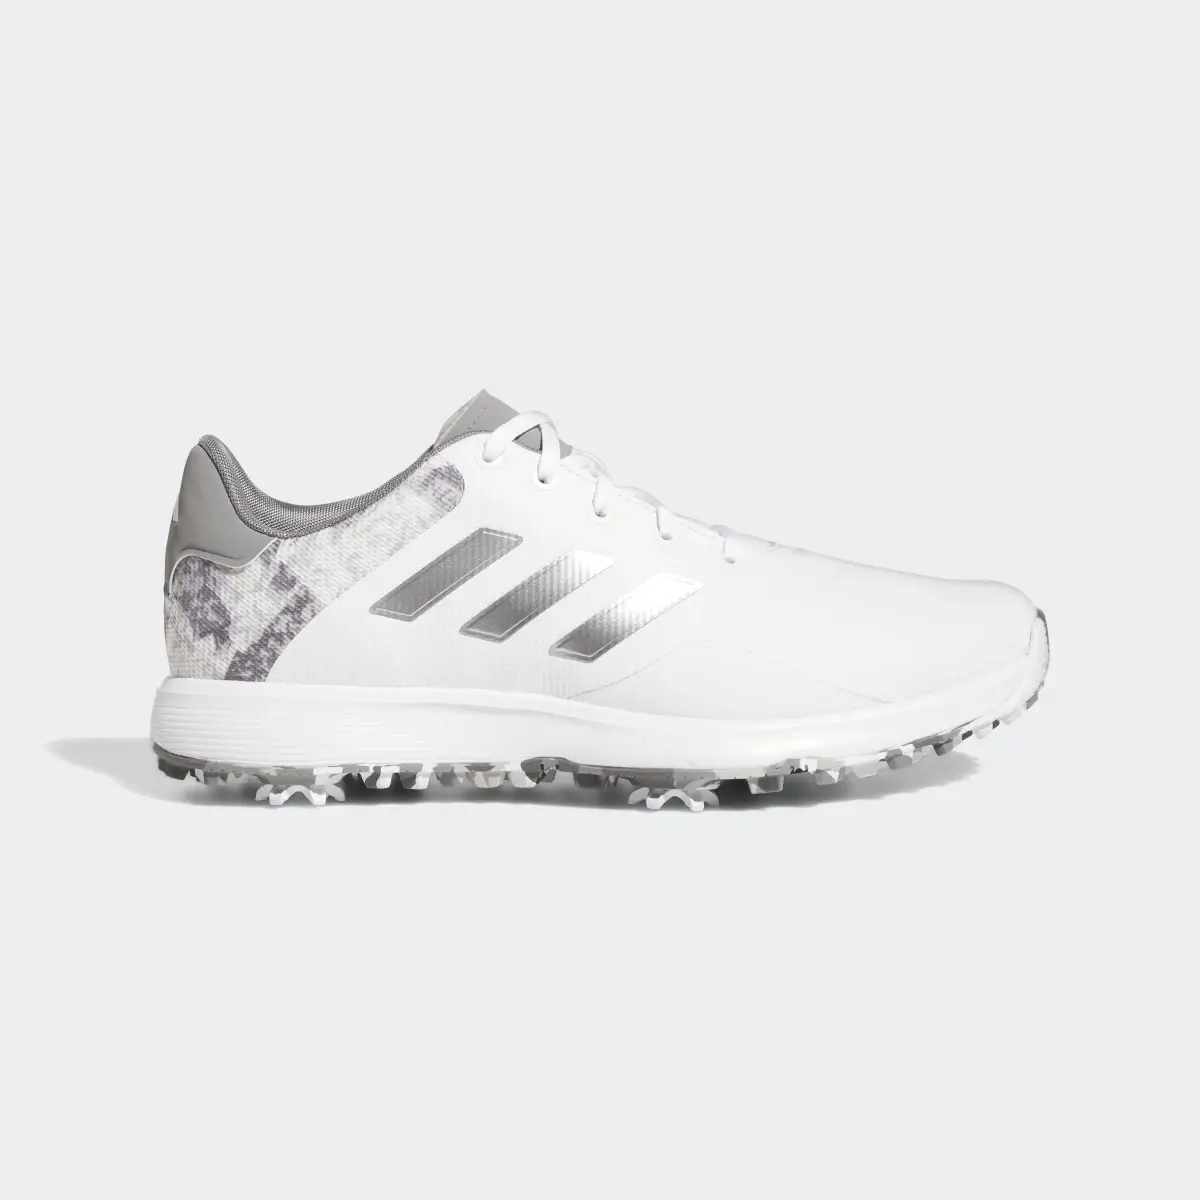 Adidas S2G Golf Shoes. 2